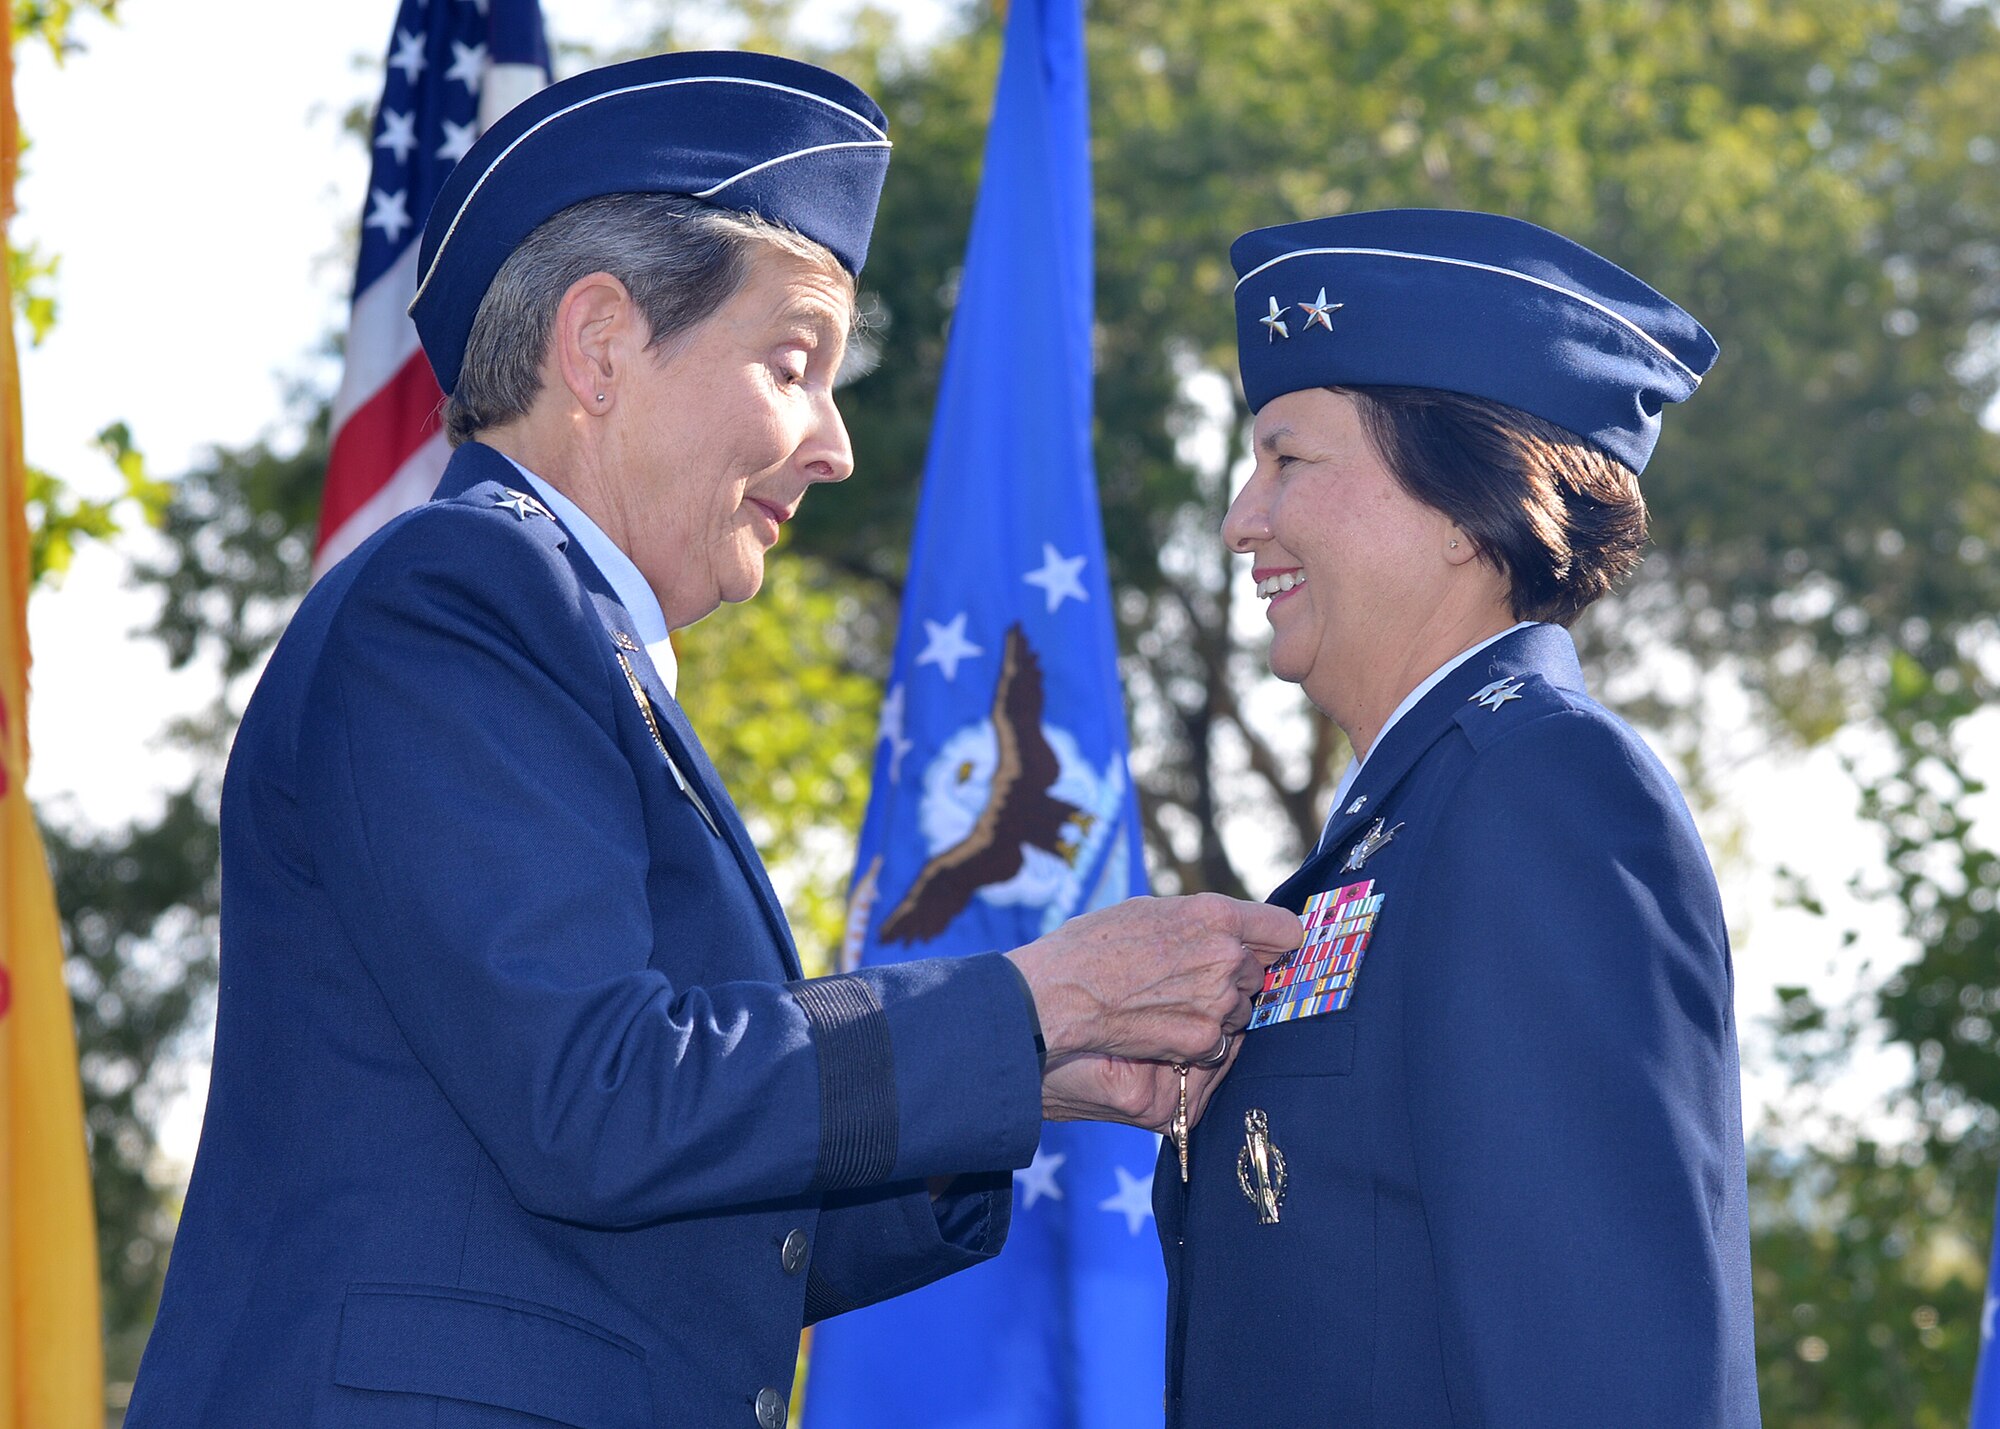 Gen. Ellen Pawlikowski, left, Air Force Materiel Command commander, pins the Air Force Distinguished Service Medal on Maj. Gen. Sandra Finan, former Air Force Nuclear Weapons Center commander, during a change of command ceremony Oct. 1 at Hardin Field.  (Photo by Todd Berenger)